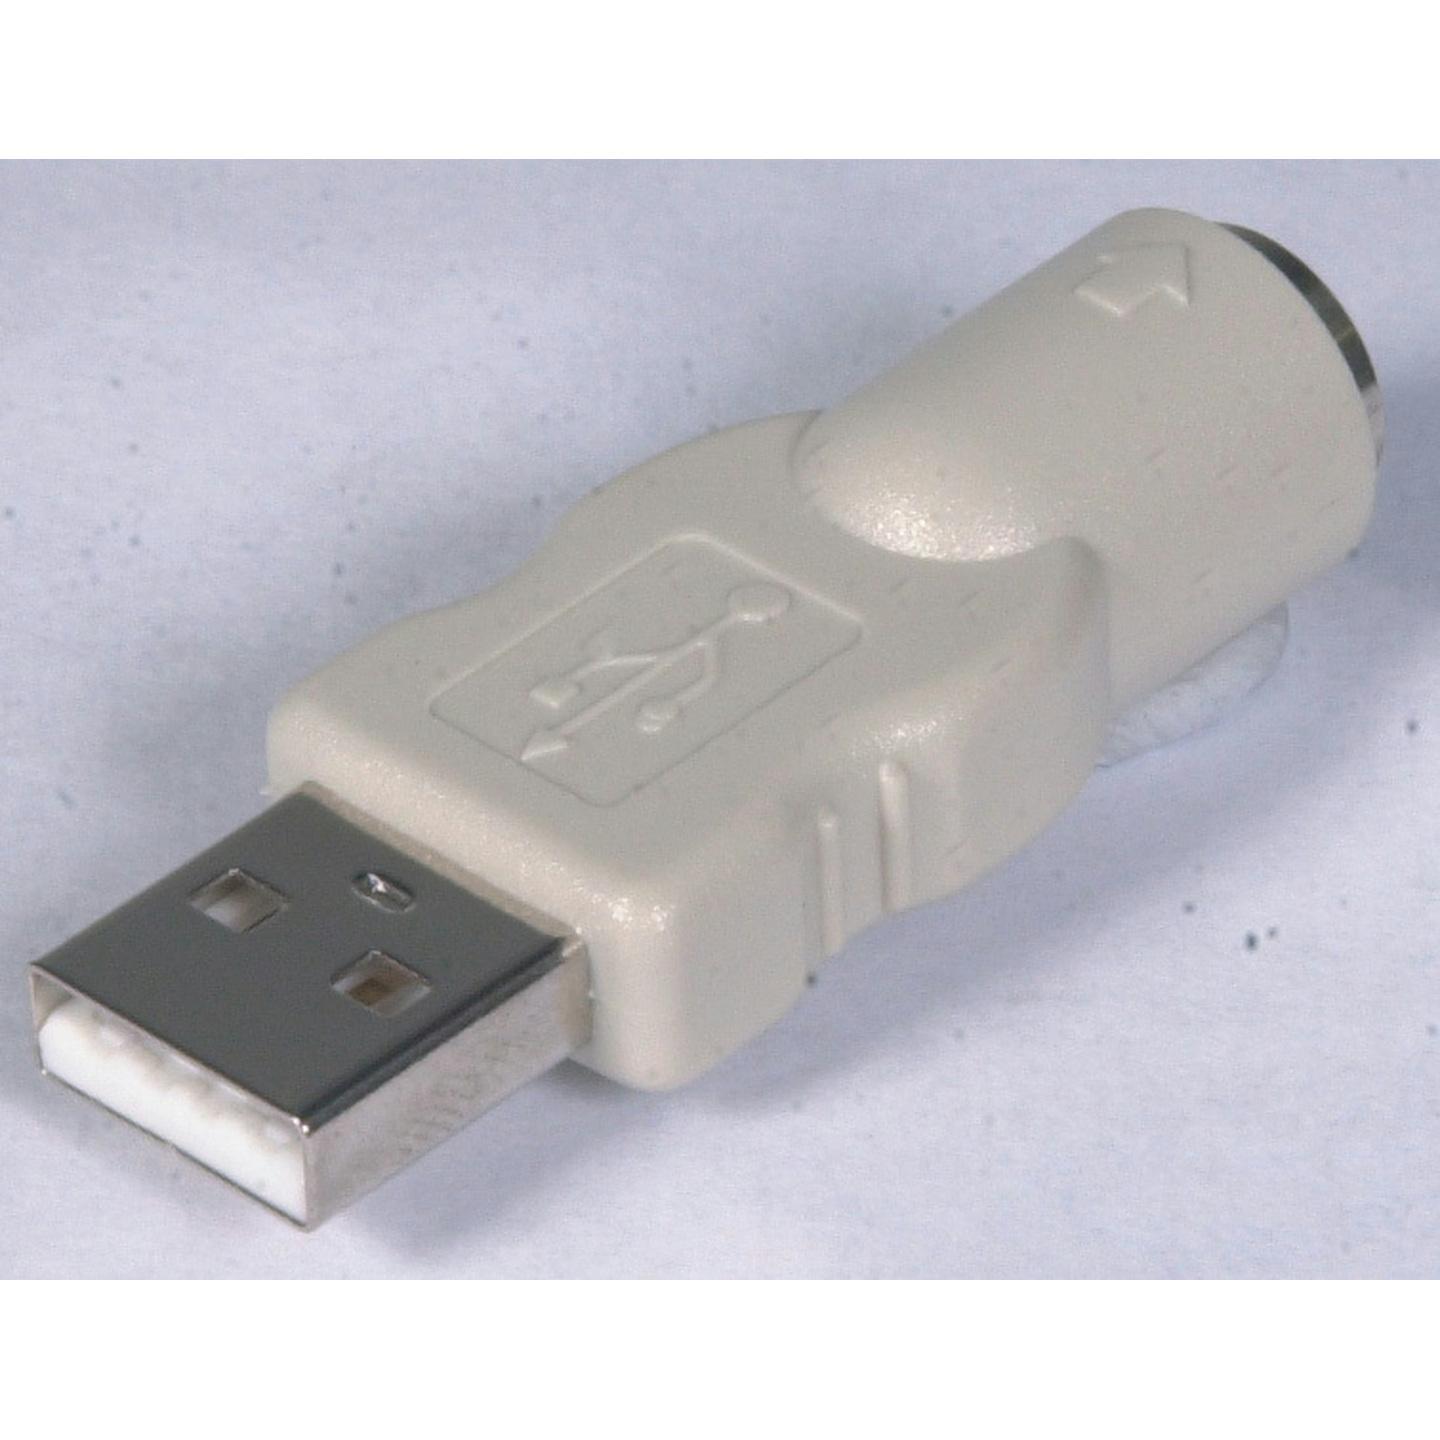 USB to PS2 Adaptor - USB Male - PS/2 Female